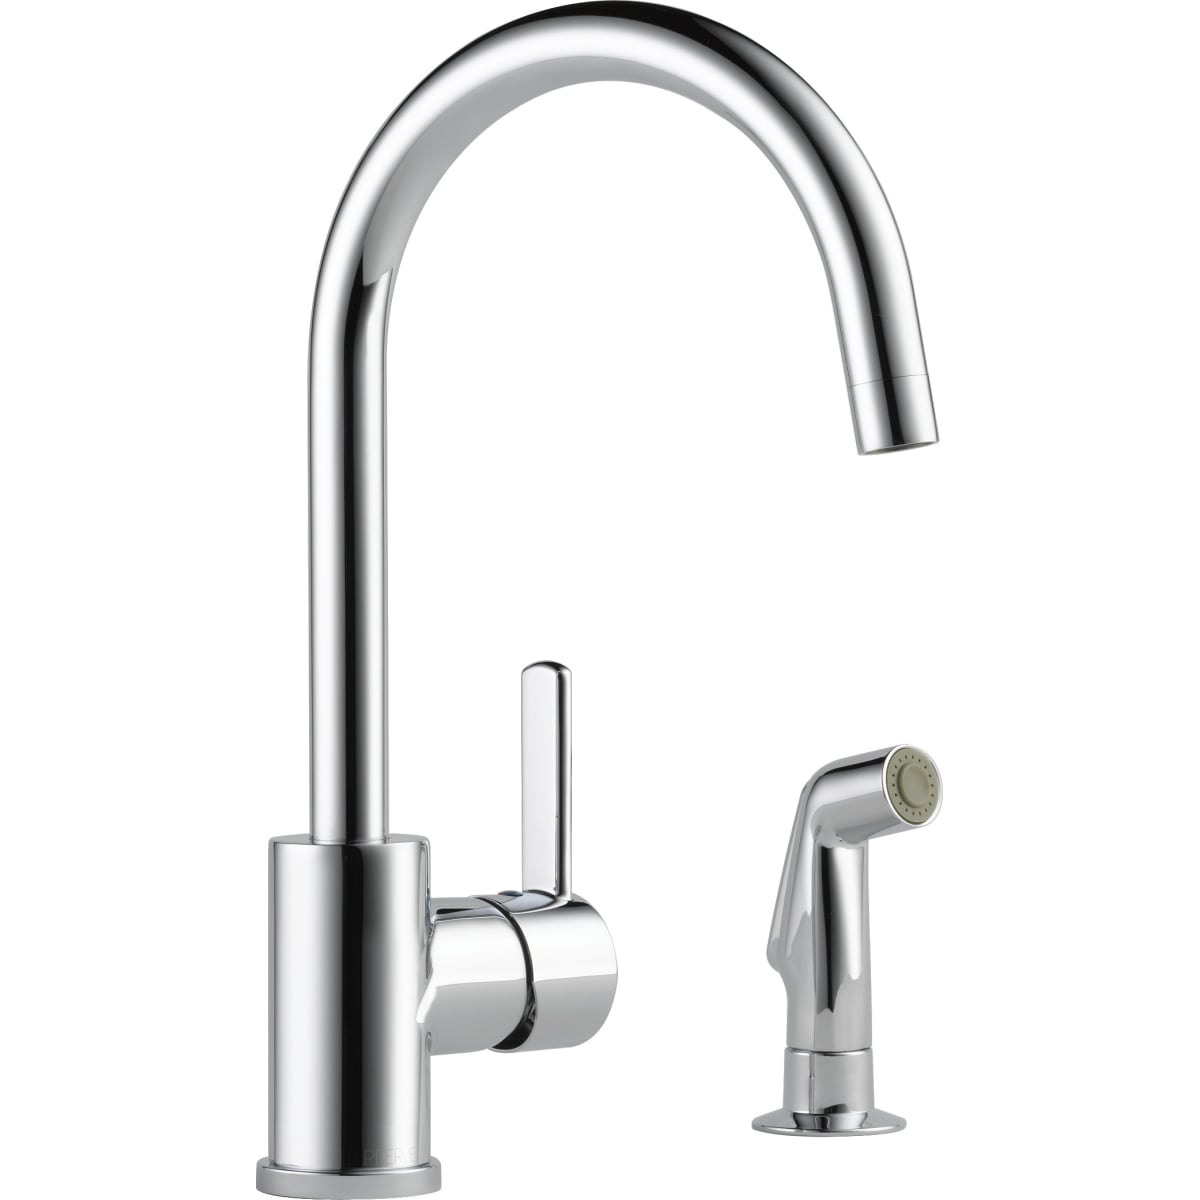 Peerless P199152lf Chrome Apex Pull Down Kitchen Faucet With Two